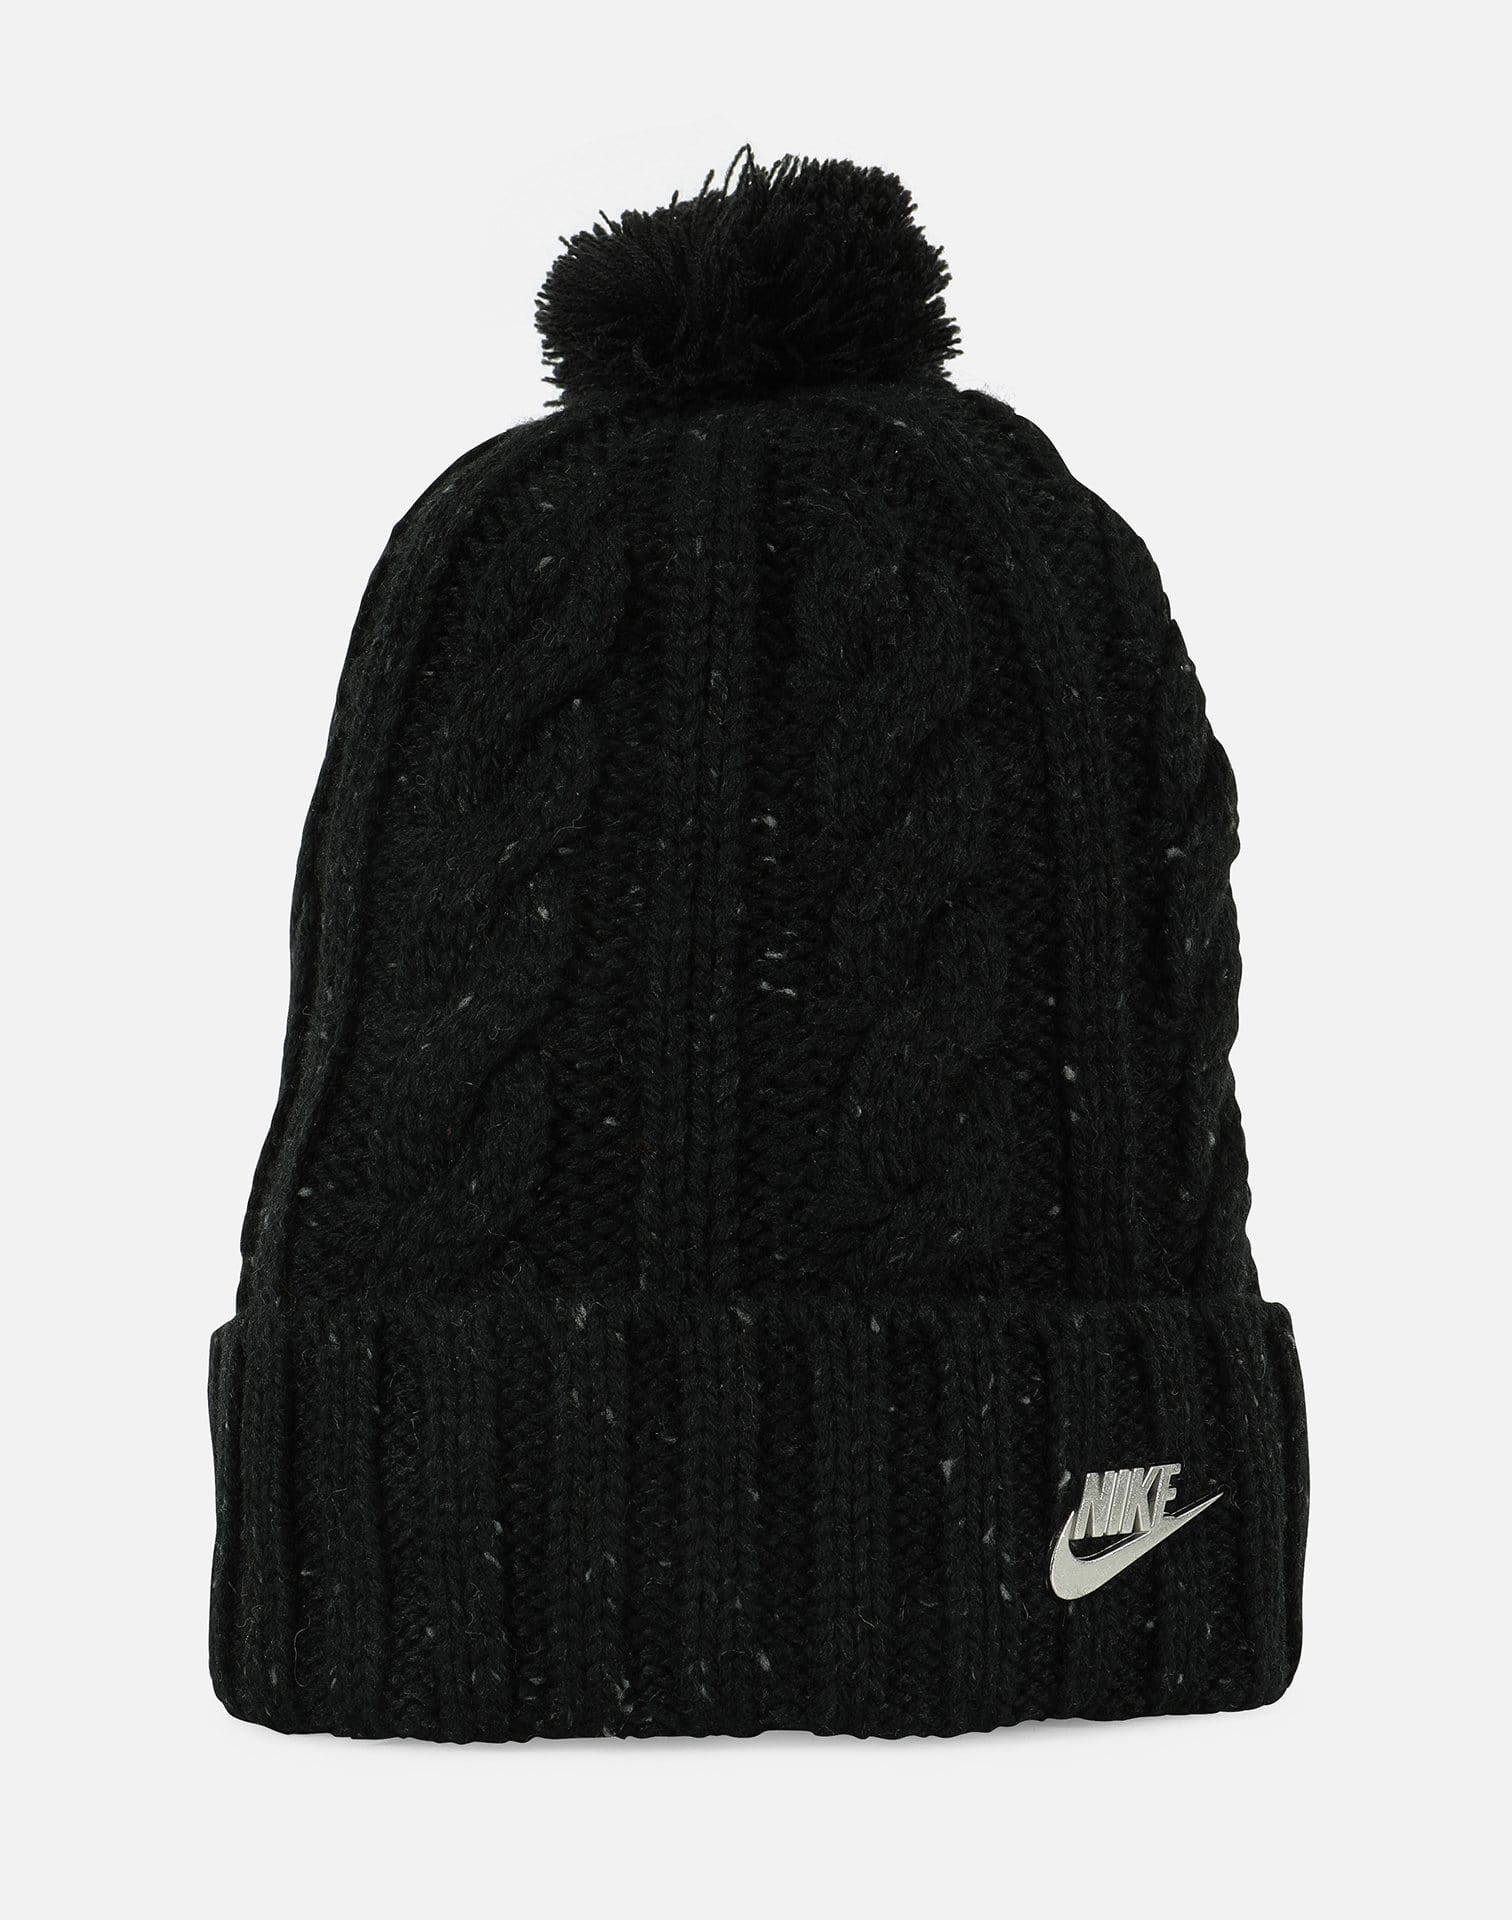 Nike NSW Women's Cable Knit Beanie